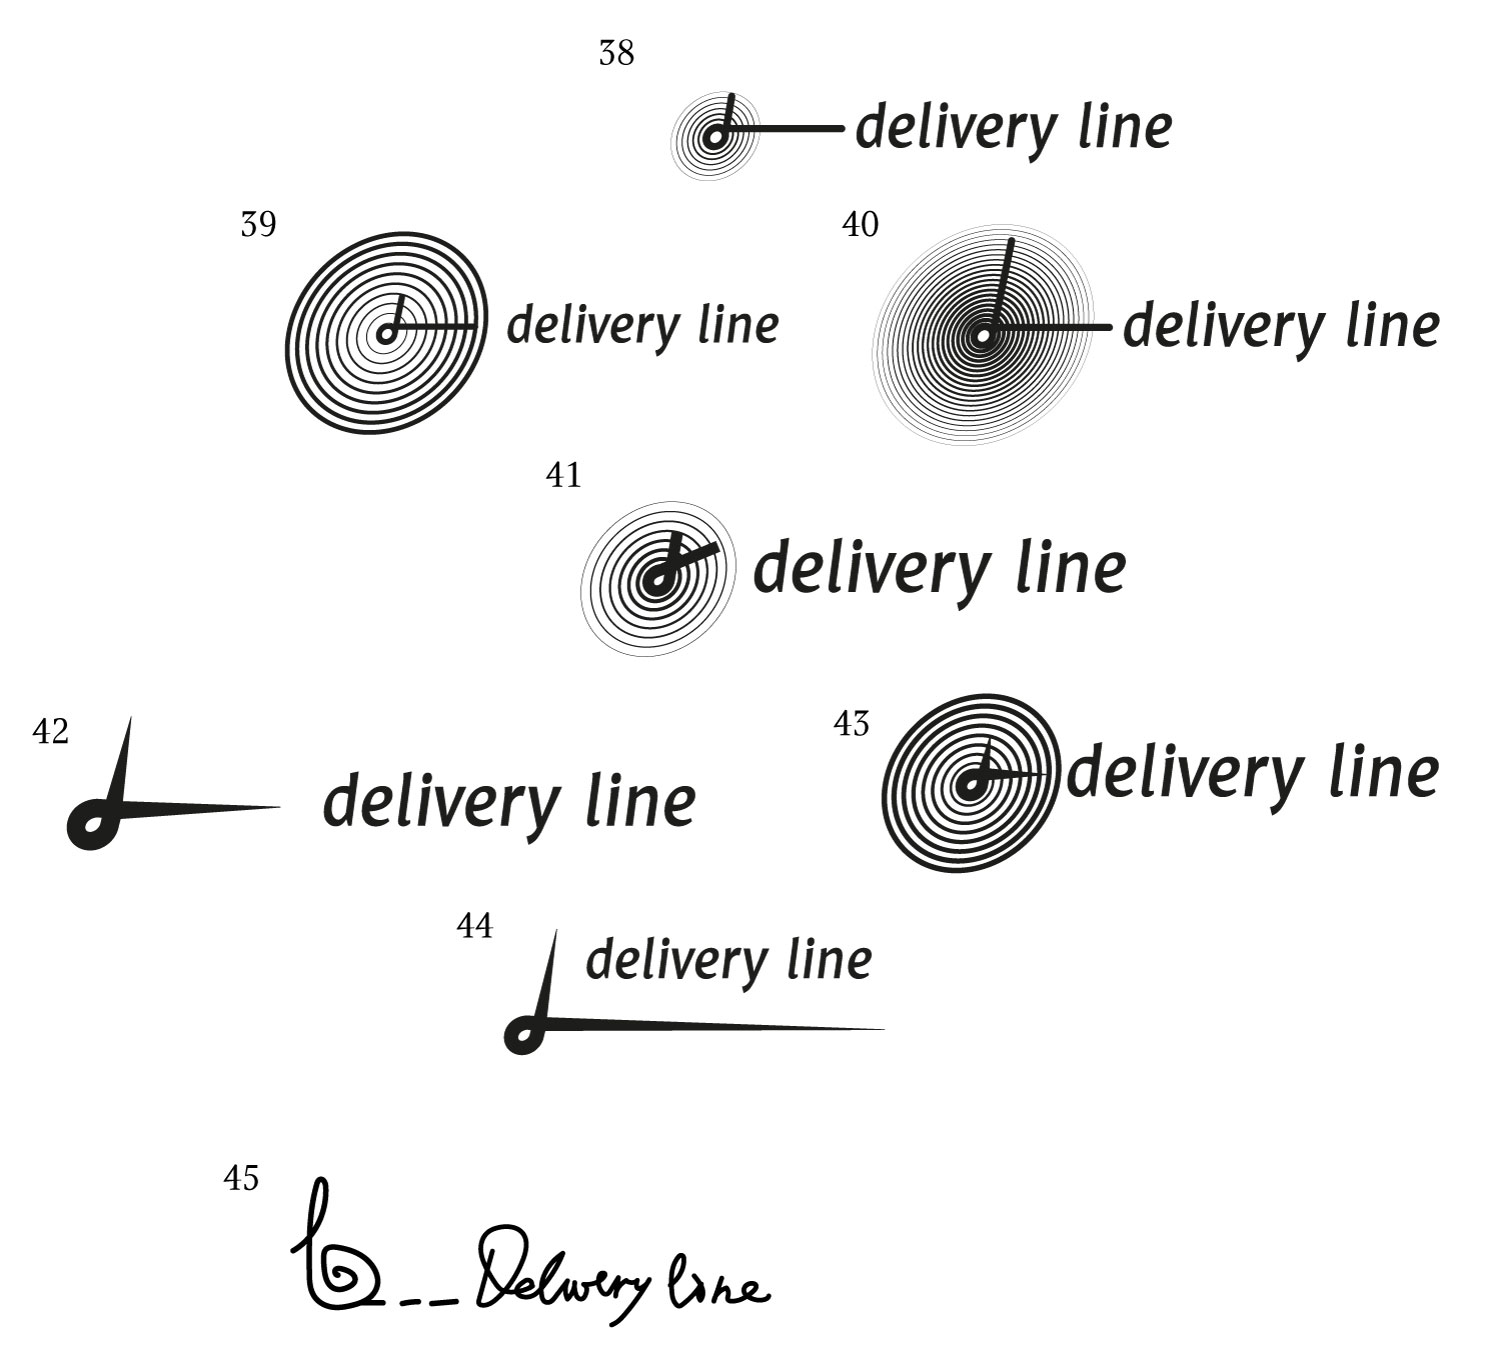 delivery line process 04